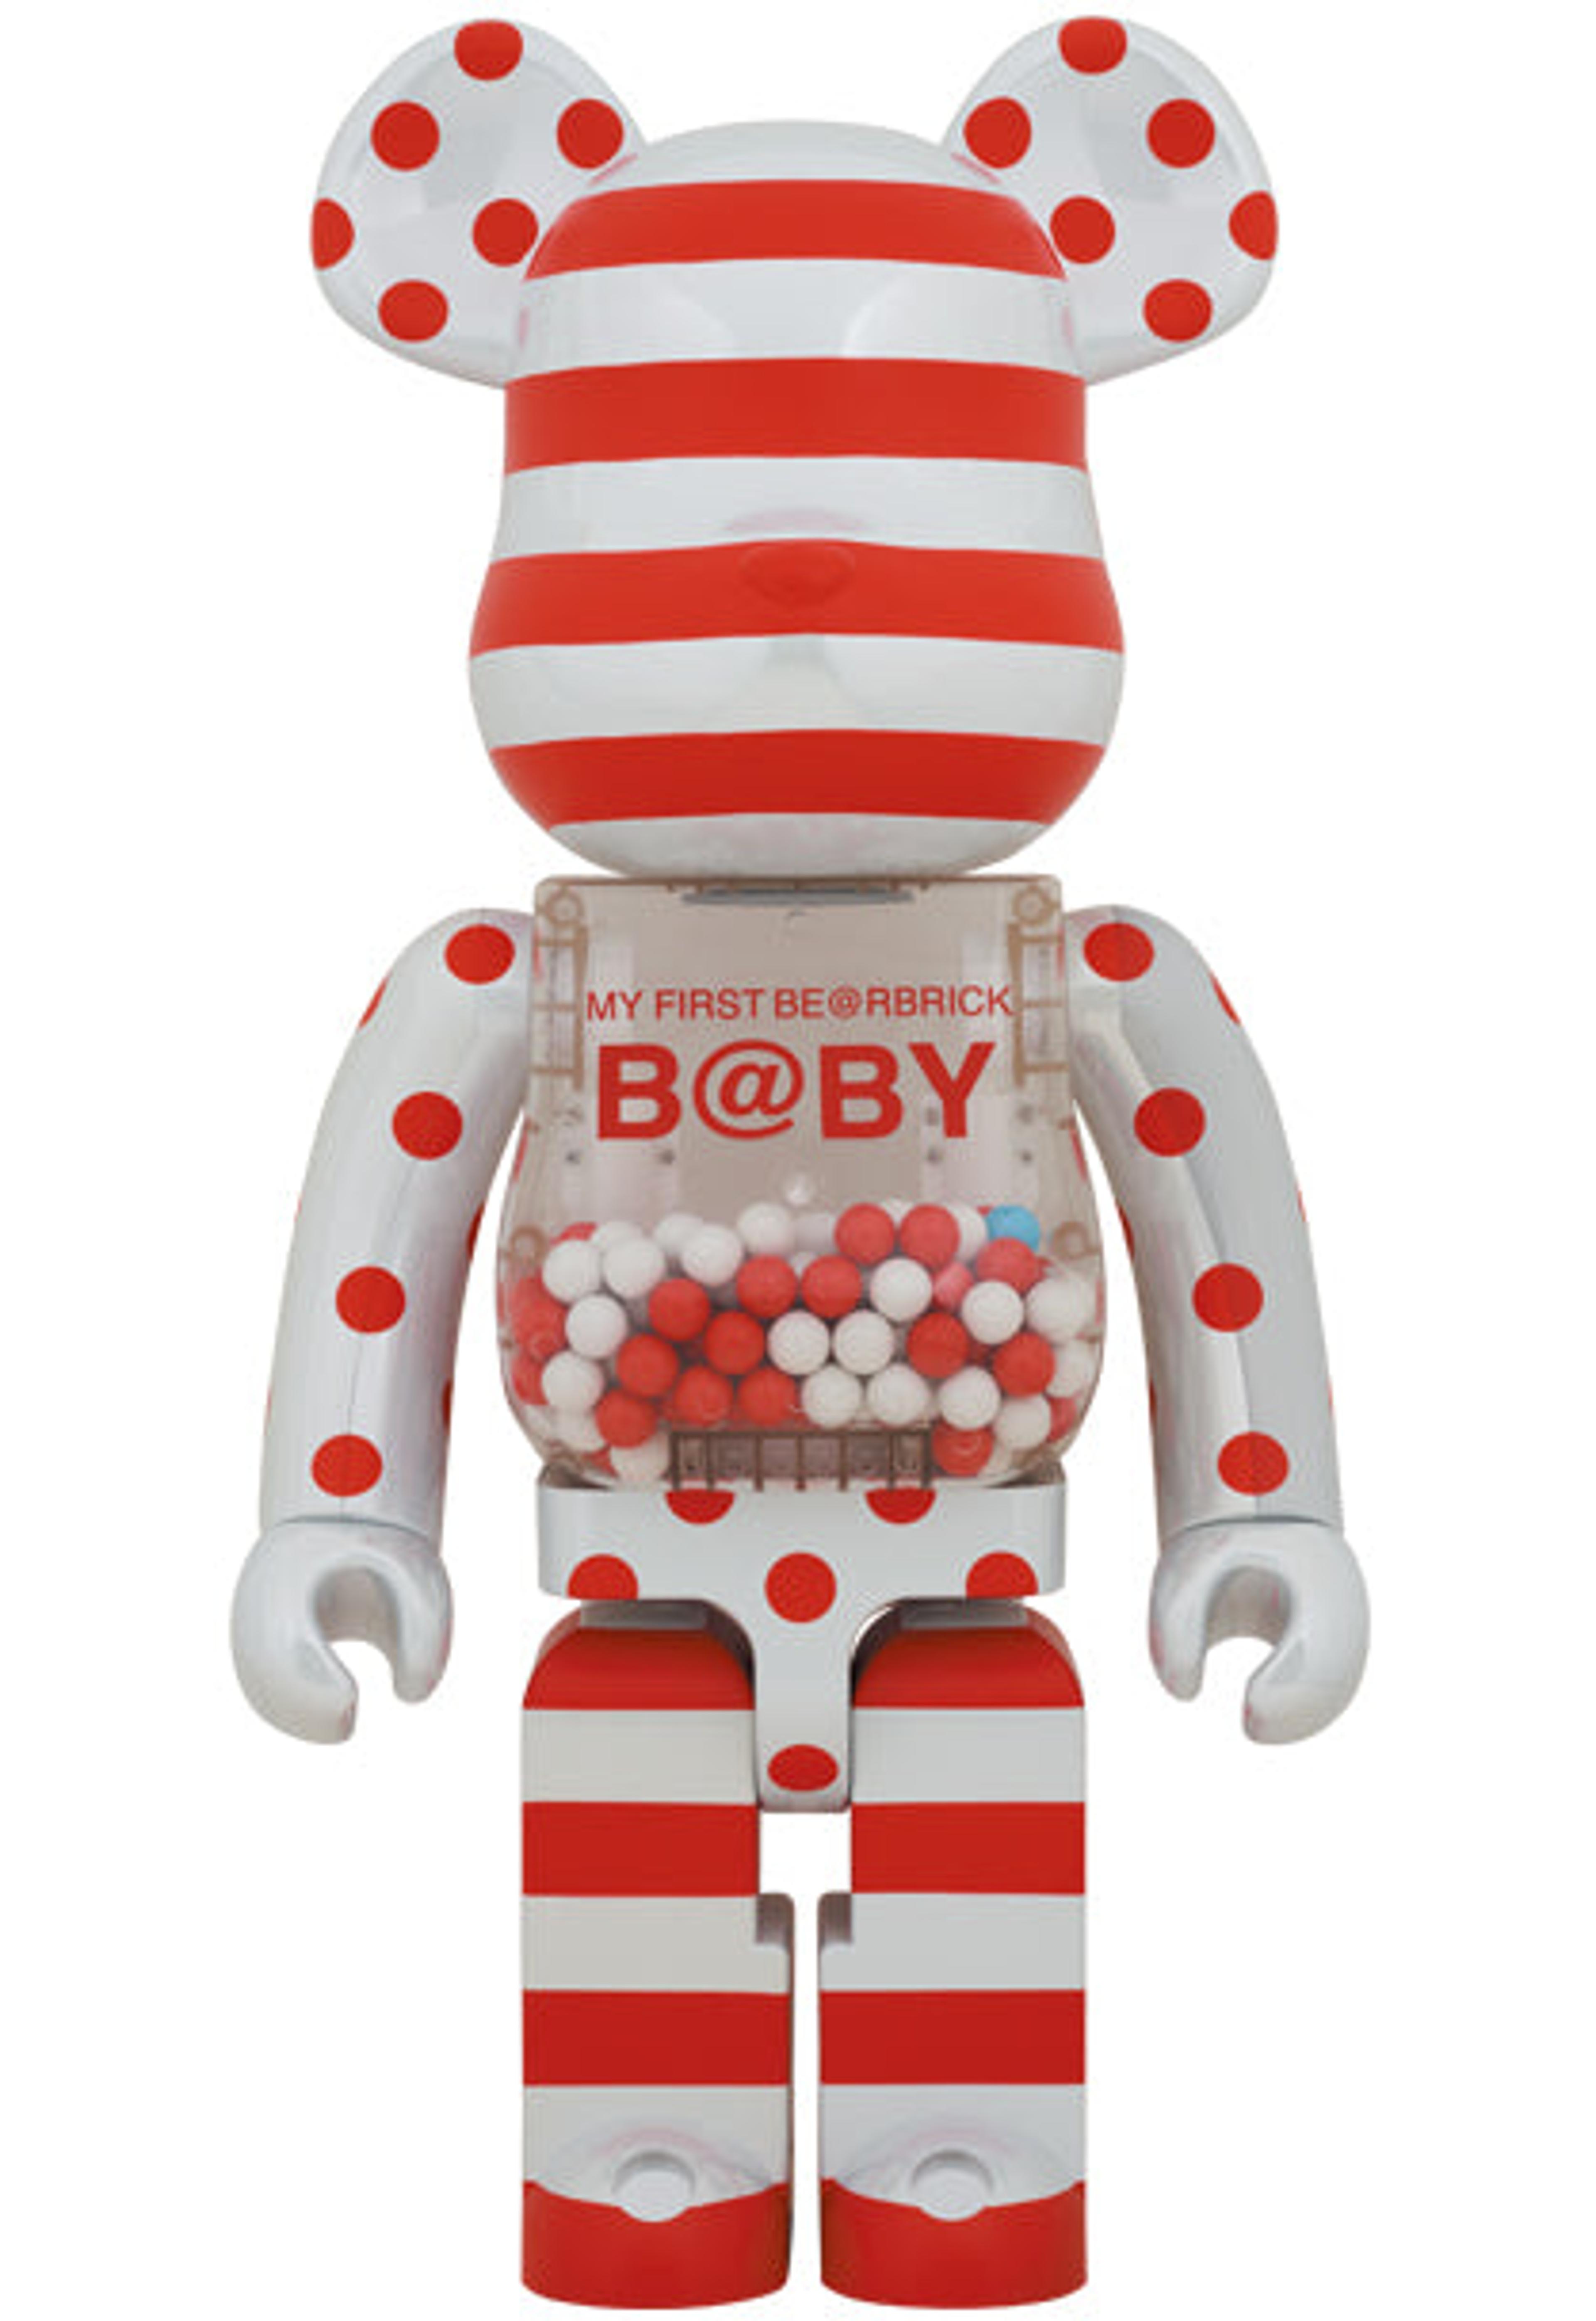 DCON23 BE@RBRICK MY FIRST B@BY BWWT3 1000%